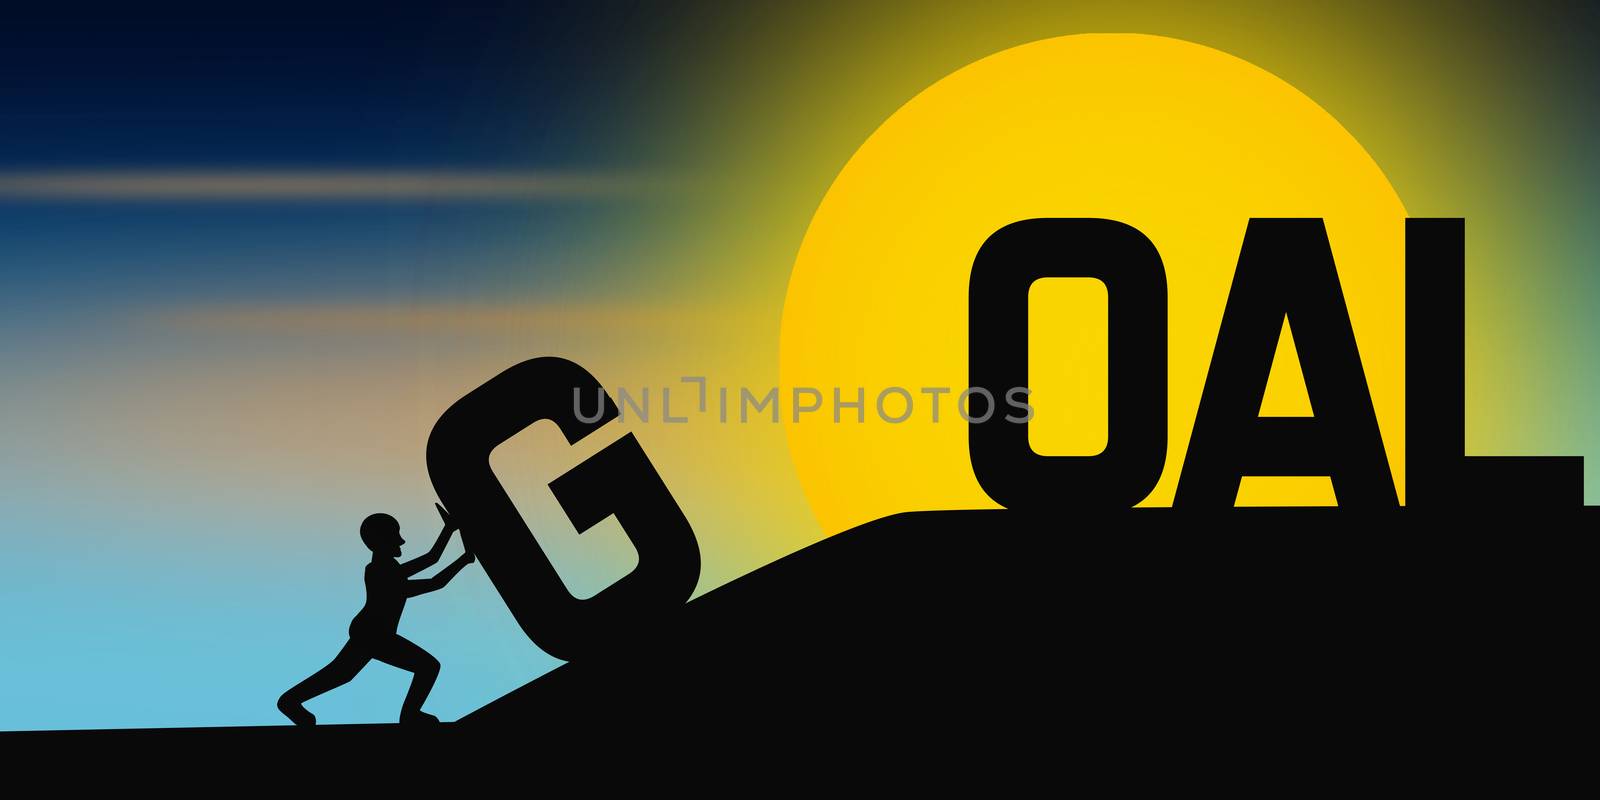 Silhouette of human to form the word goal by tang90246